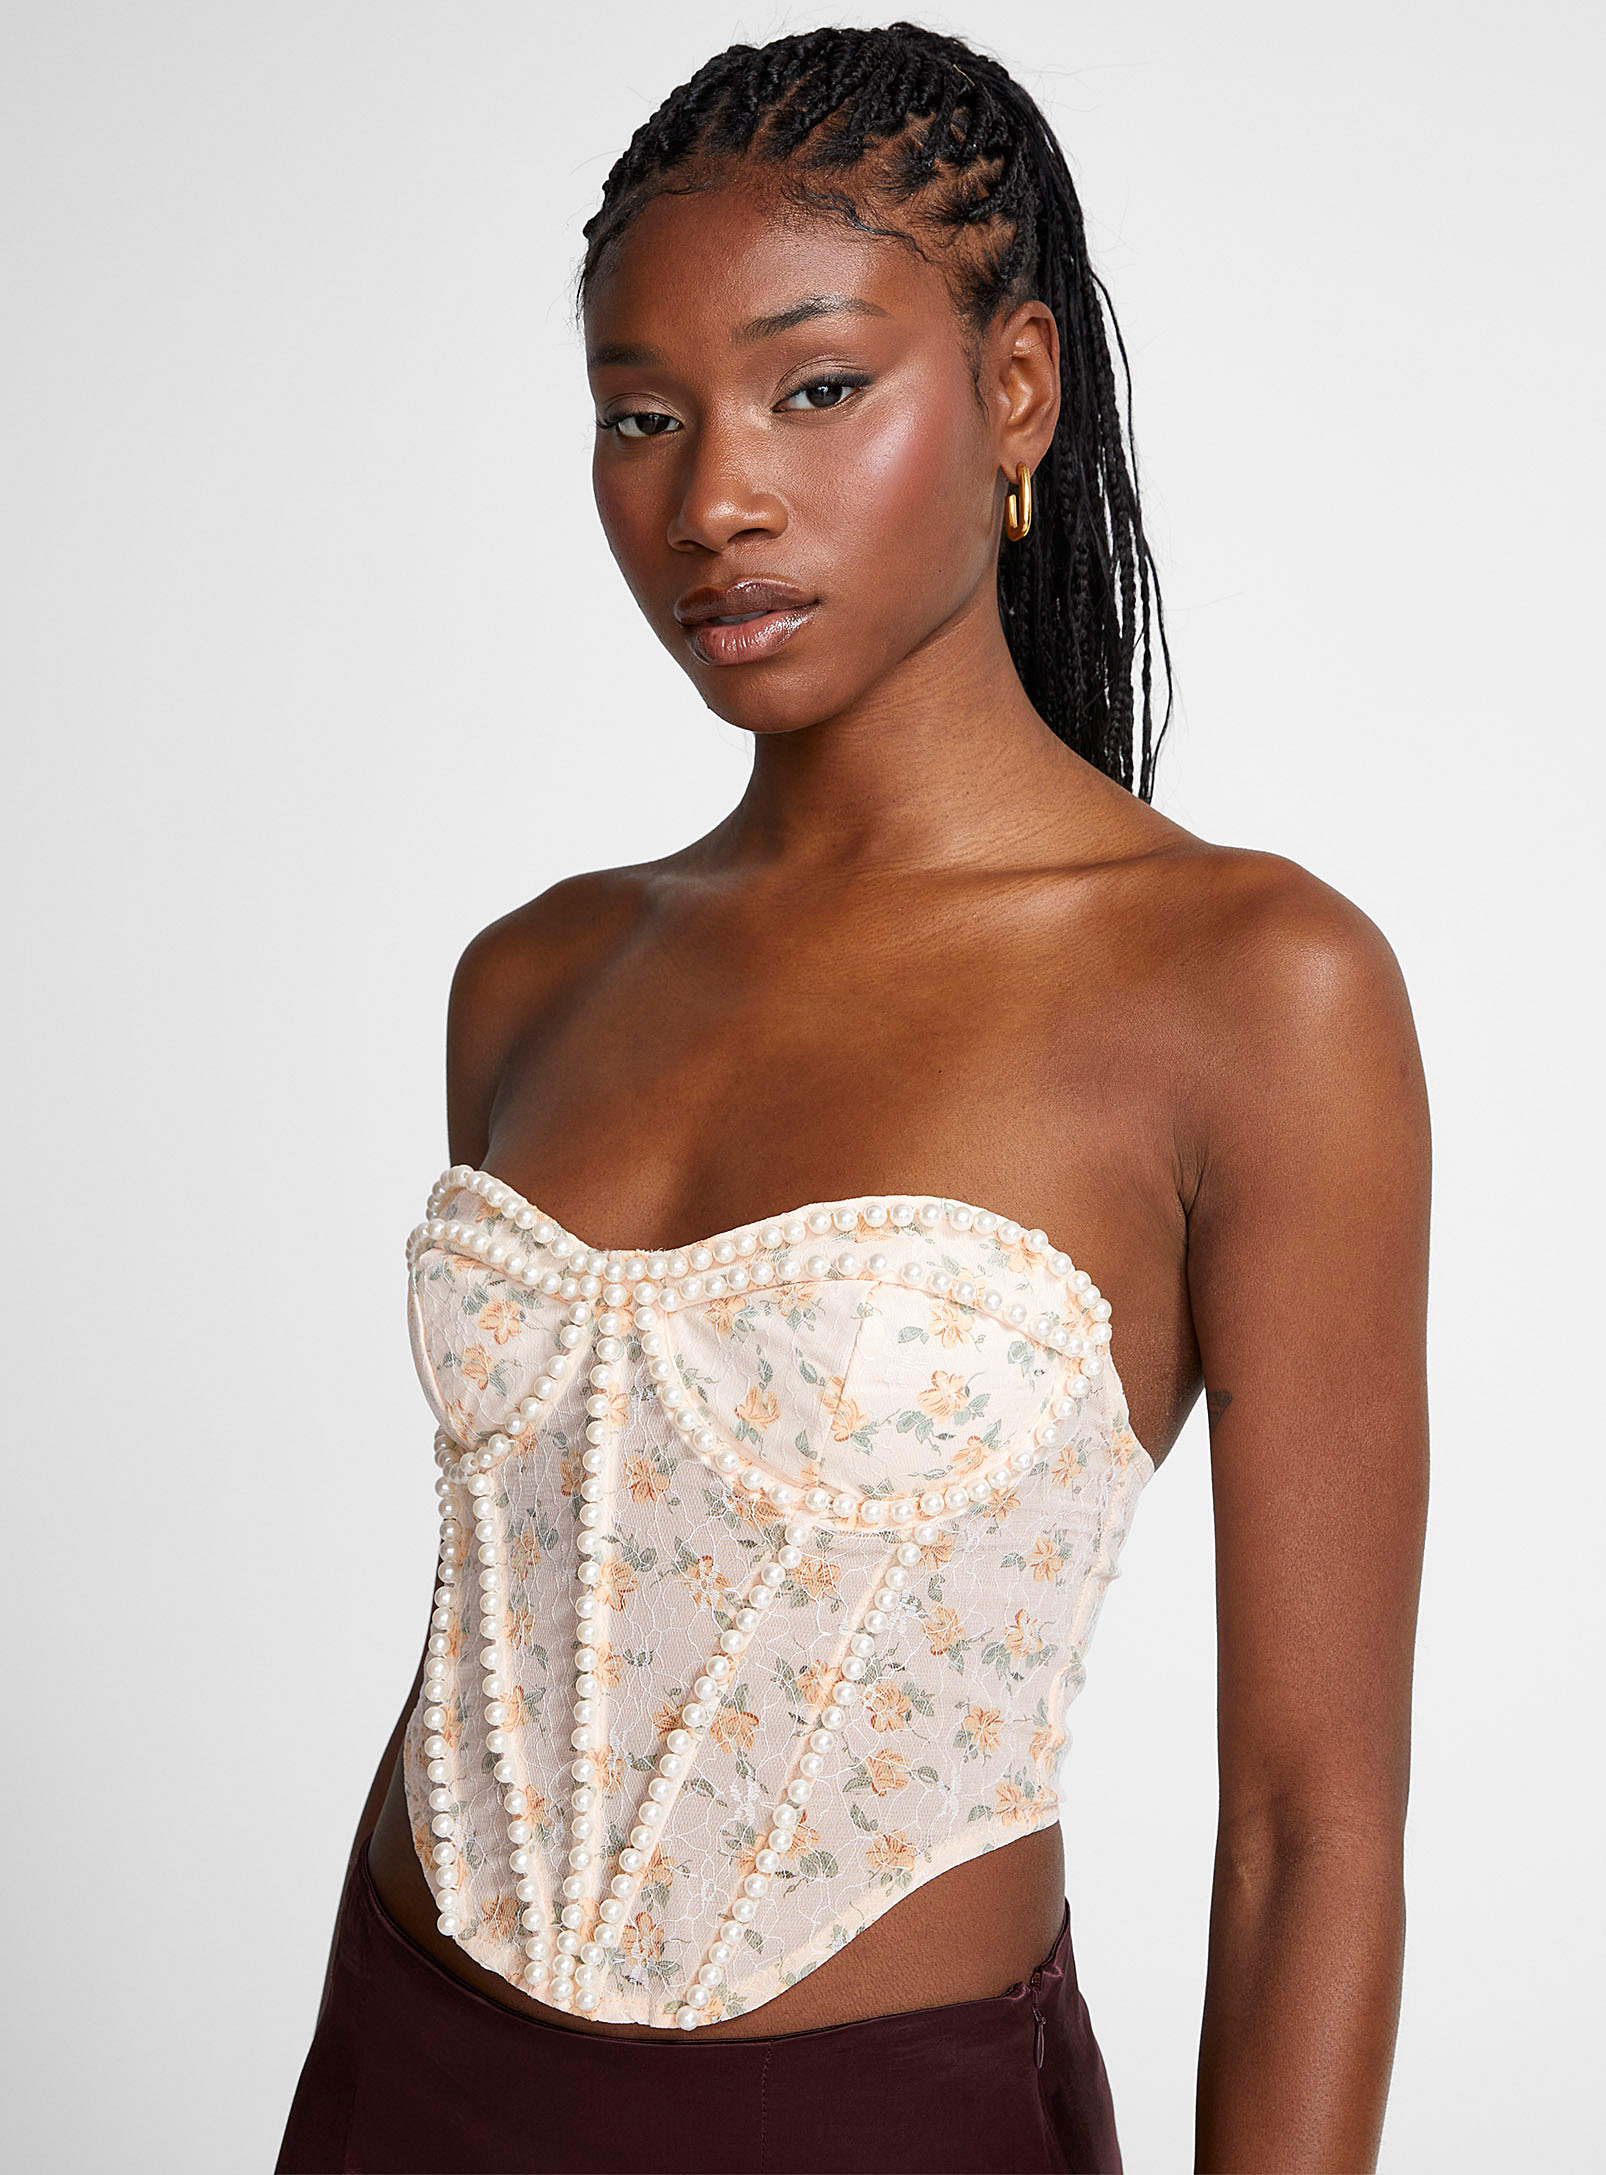 Icone Flowers And Pearls Micromesh Corset In Patterned Ecru